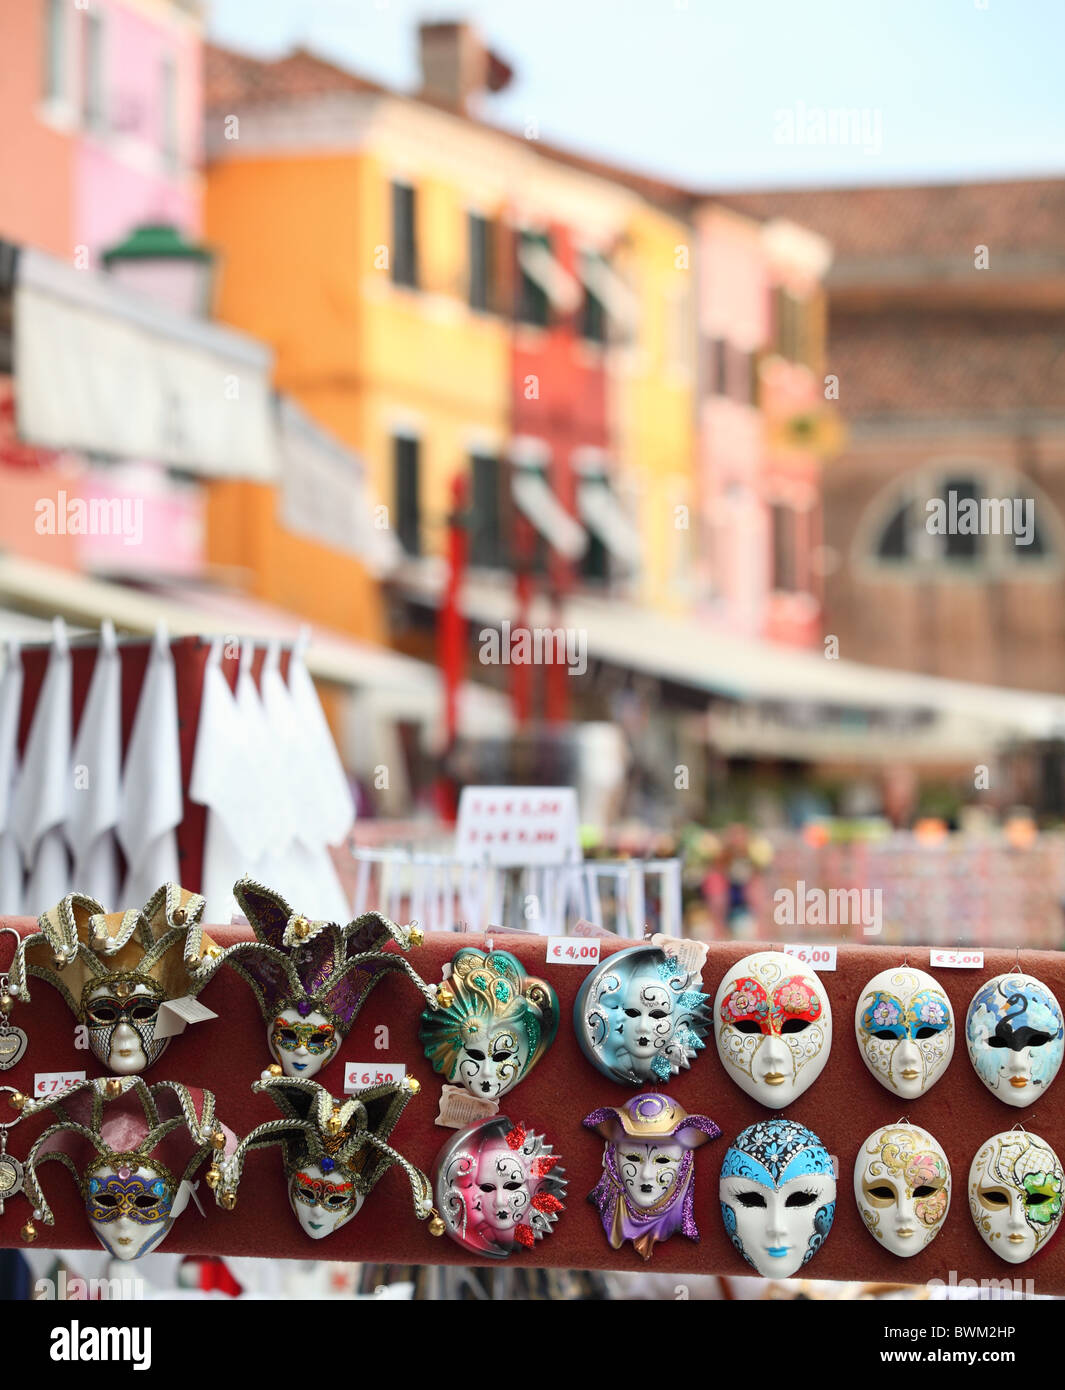 Miniature Venetian carnevale masks on sale on Burano island, which is part of the Venetian archipelago. Stock Photo